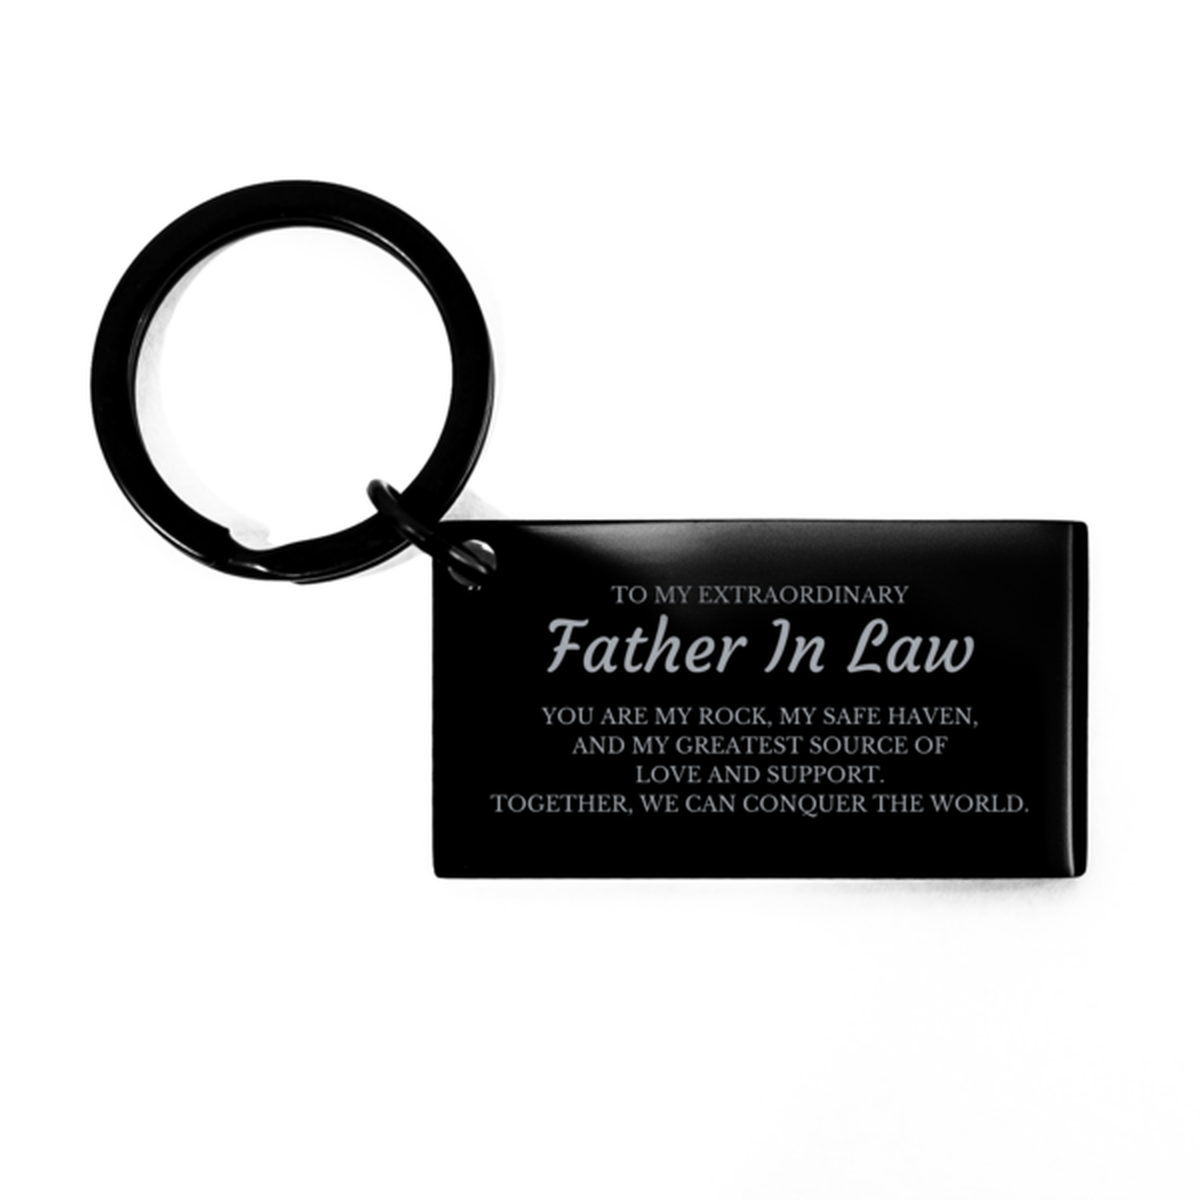 To My Extraordinary Father In Law Gifts, Together, we can conquer the world, Birthday Keychain For Father In Law, Christmas Gifts For Father In Law